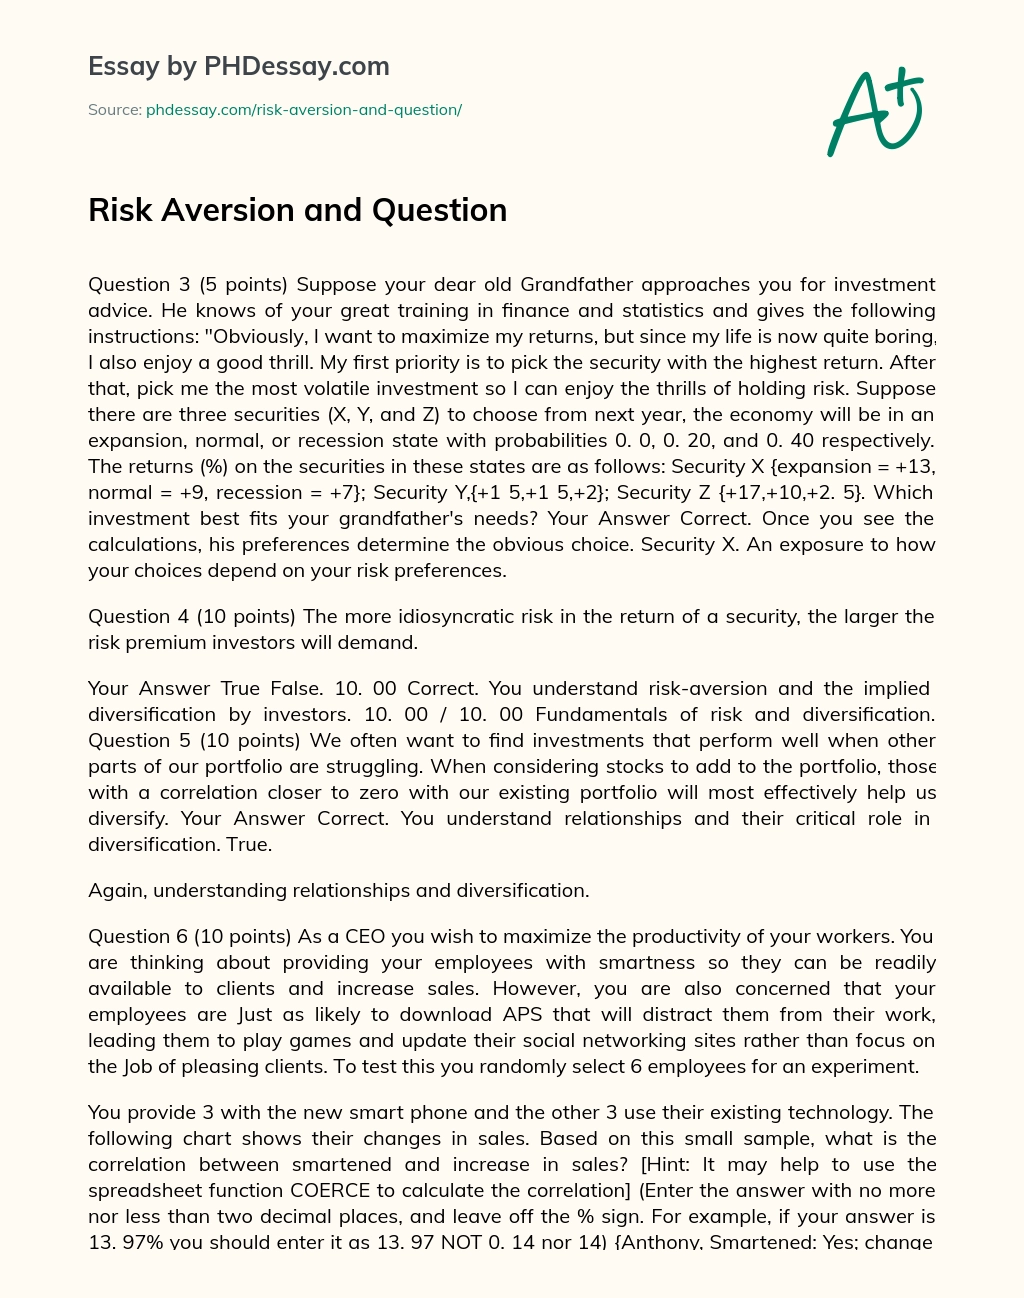 Risk Aversion and Question essay